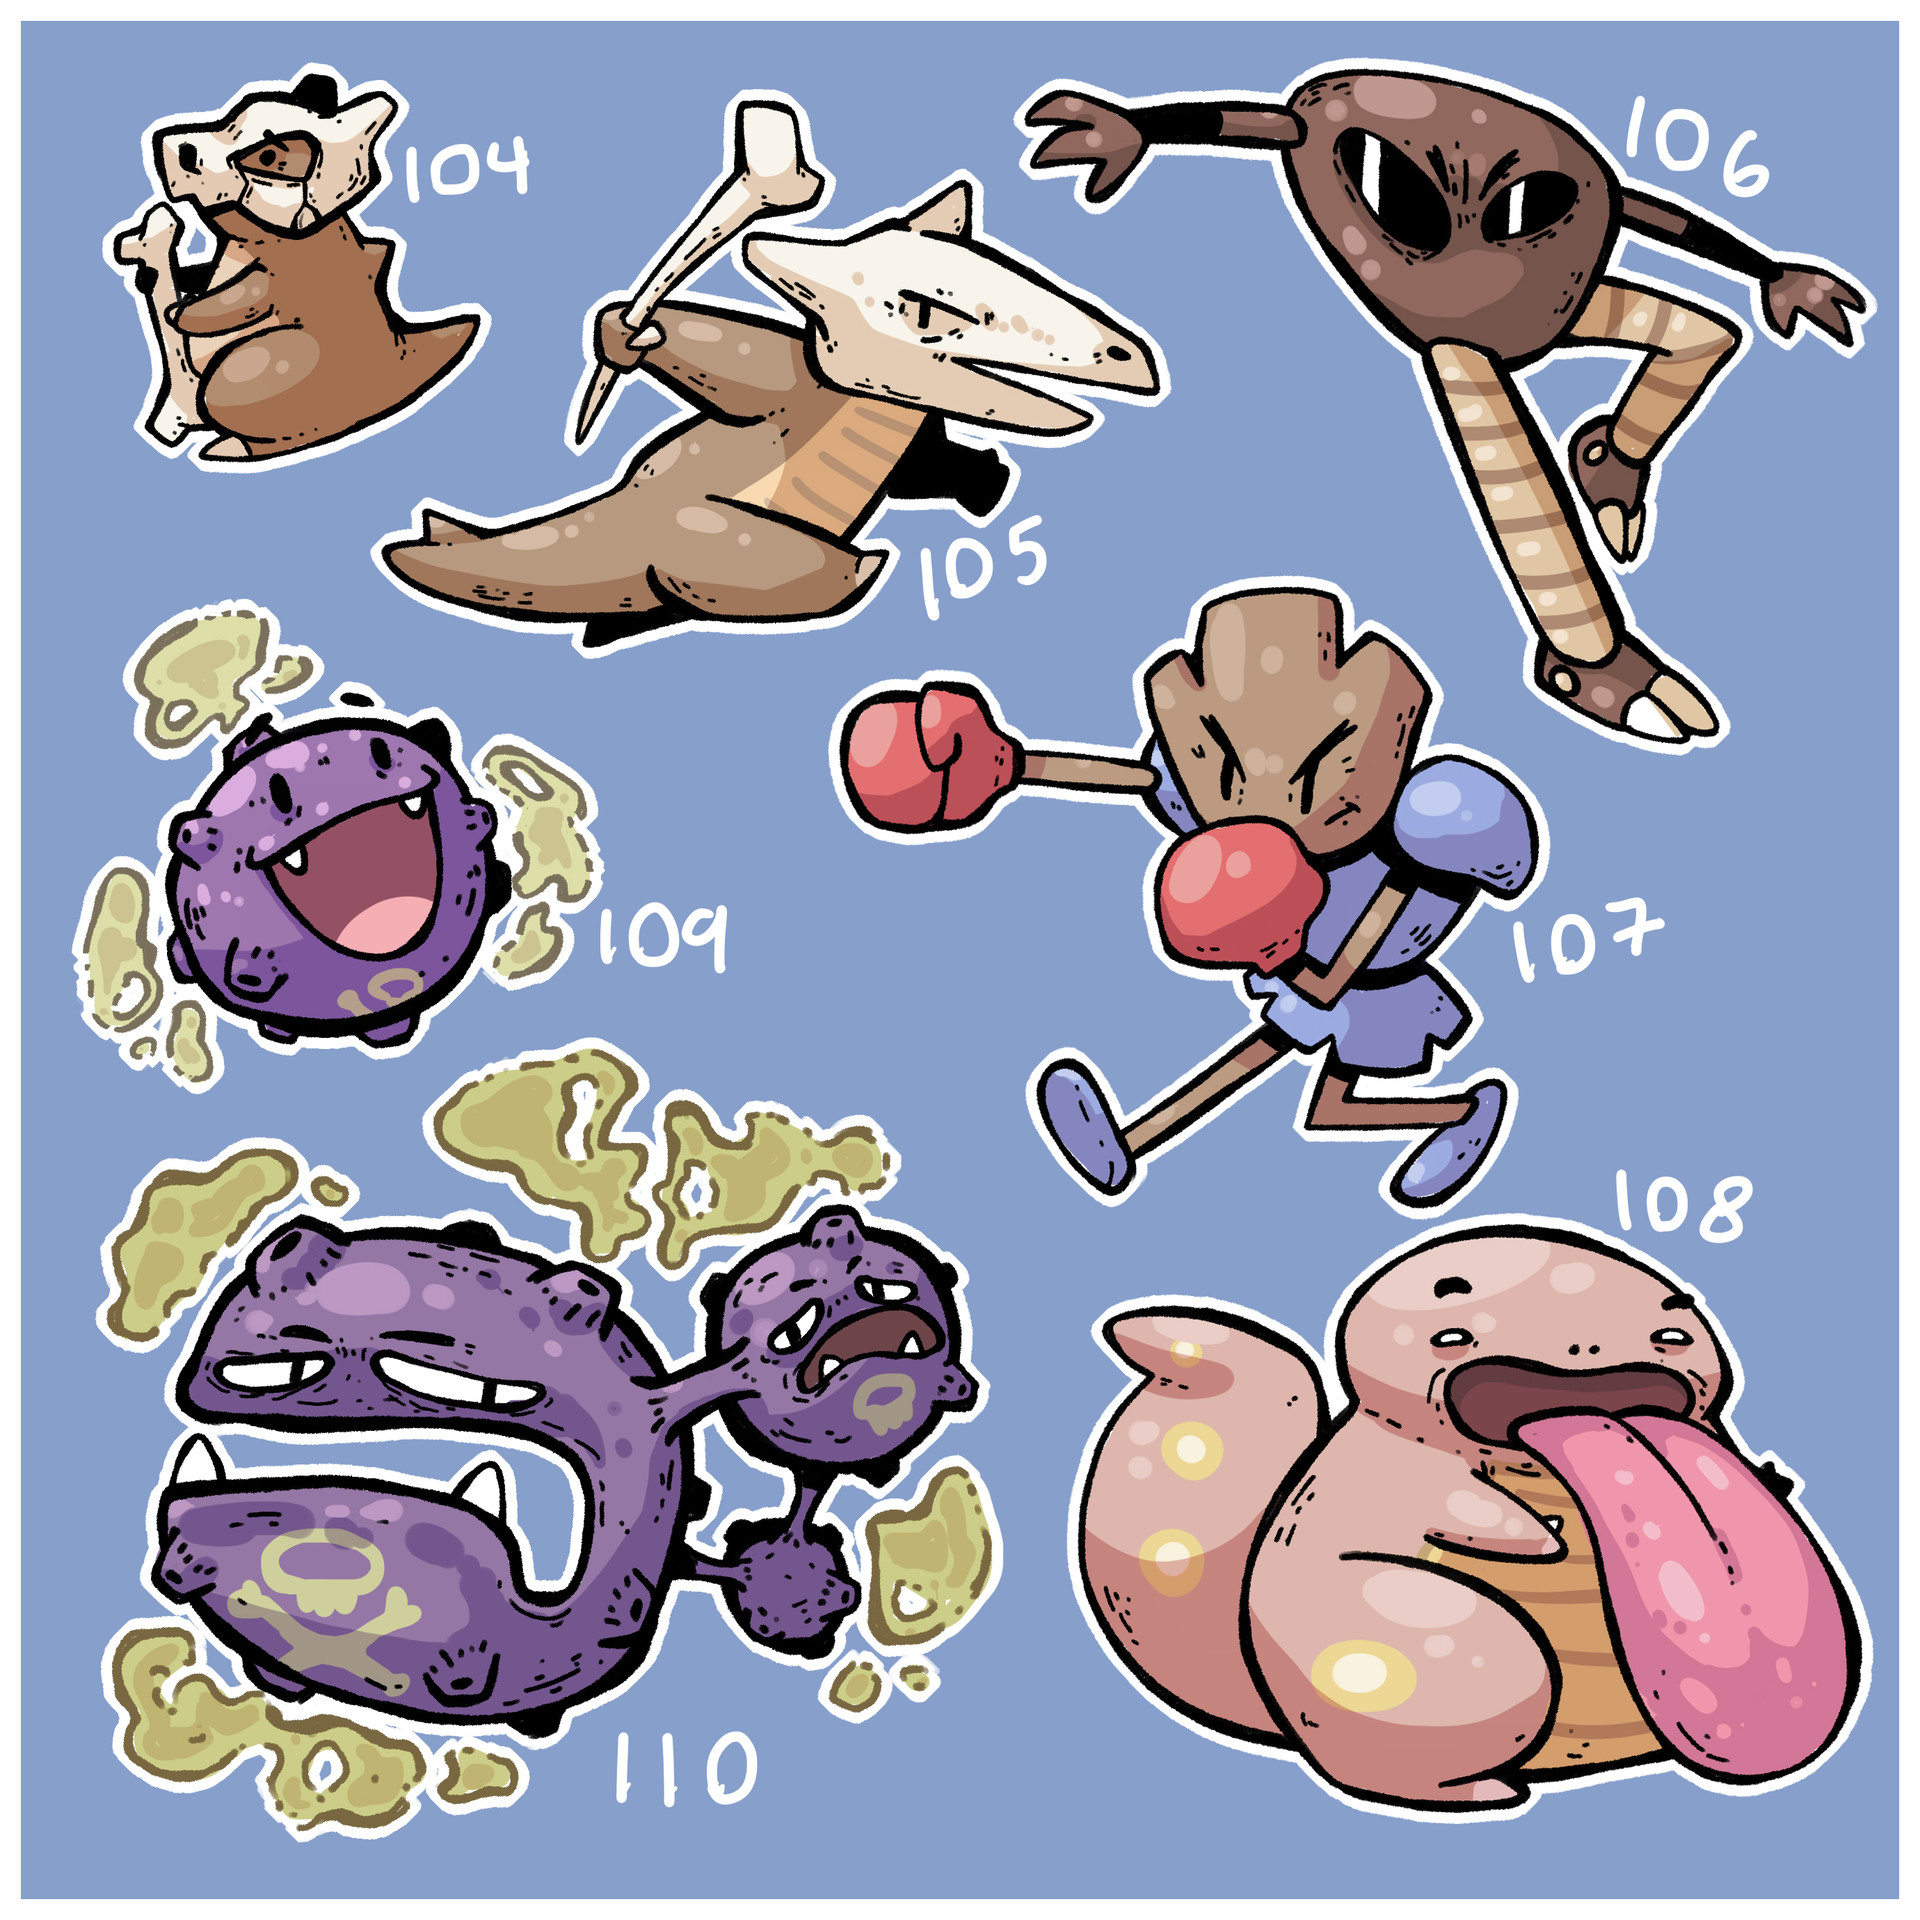 Diego Rosales - 151 Pokemon from memory